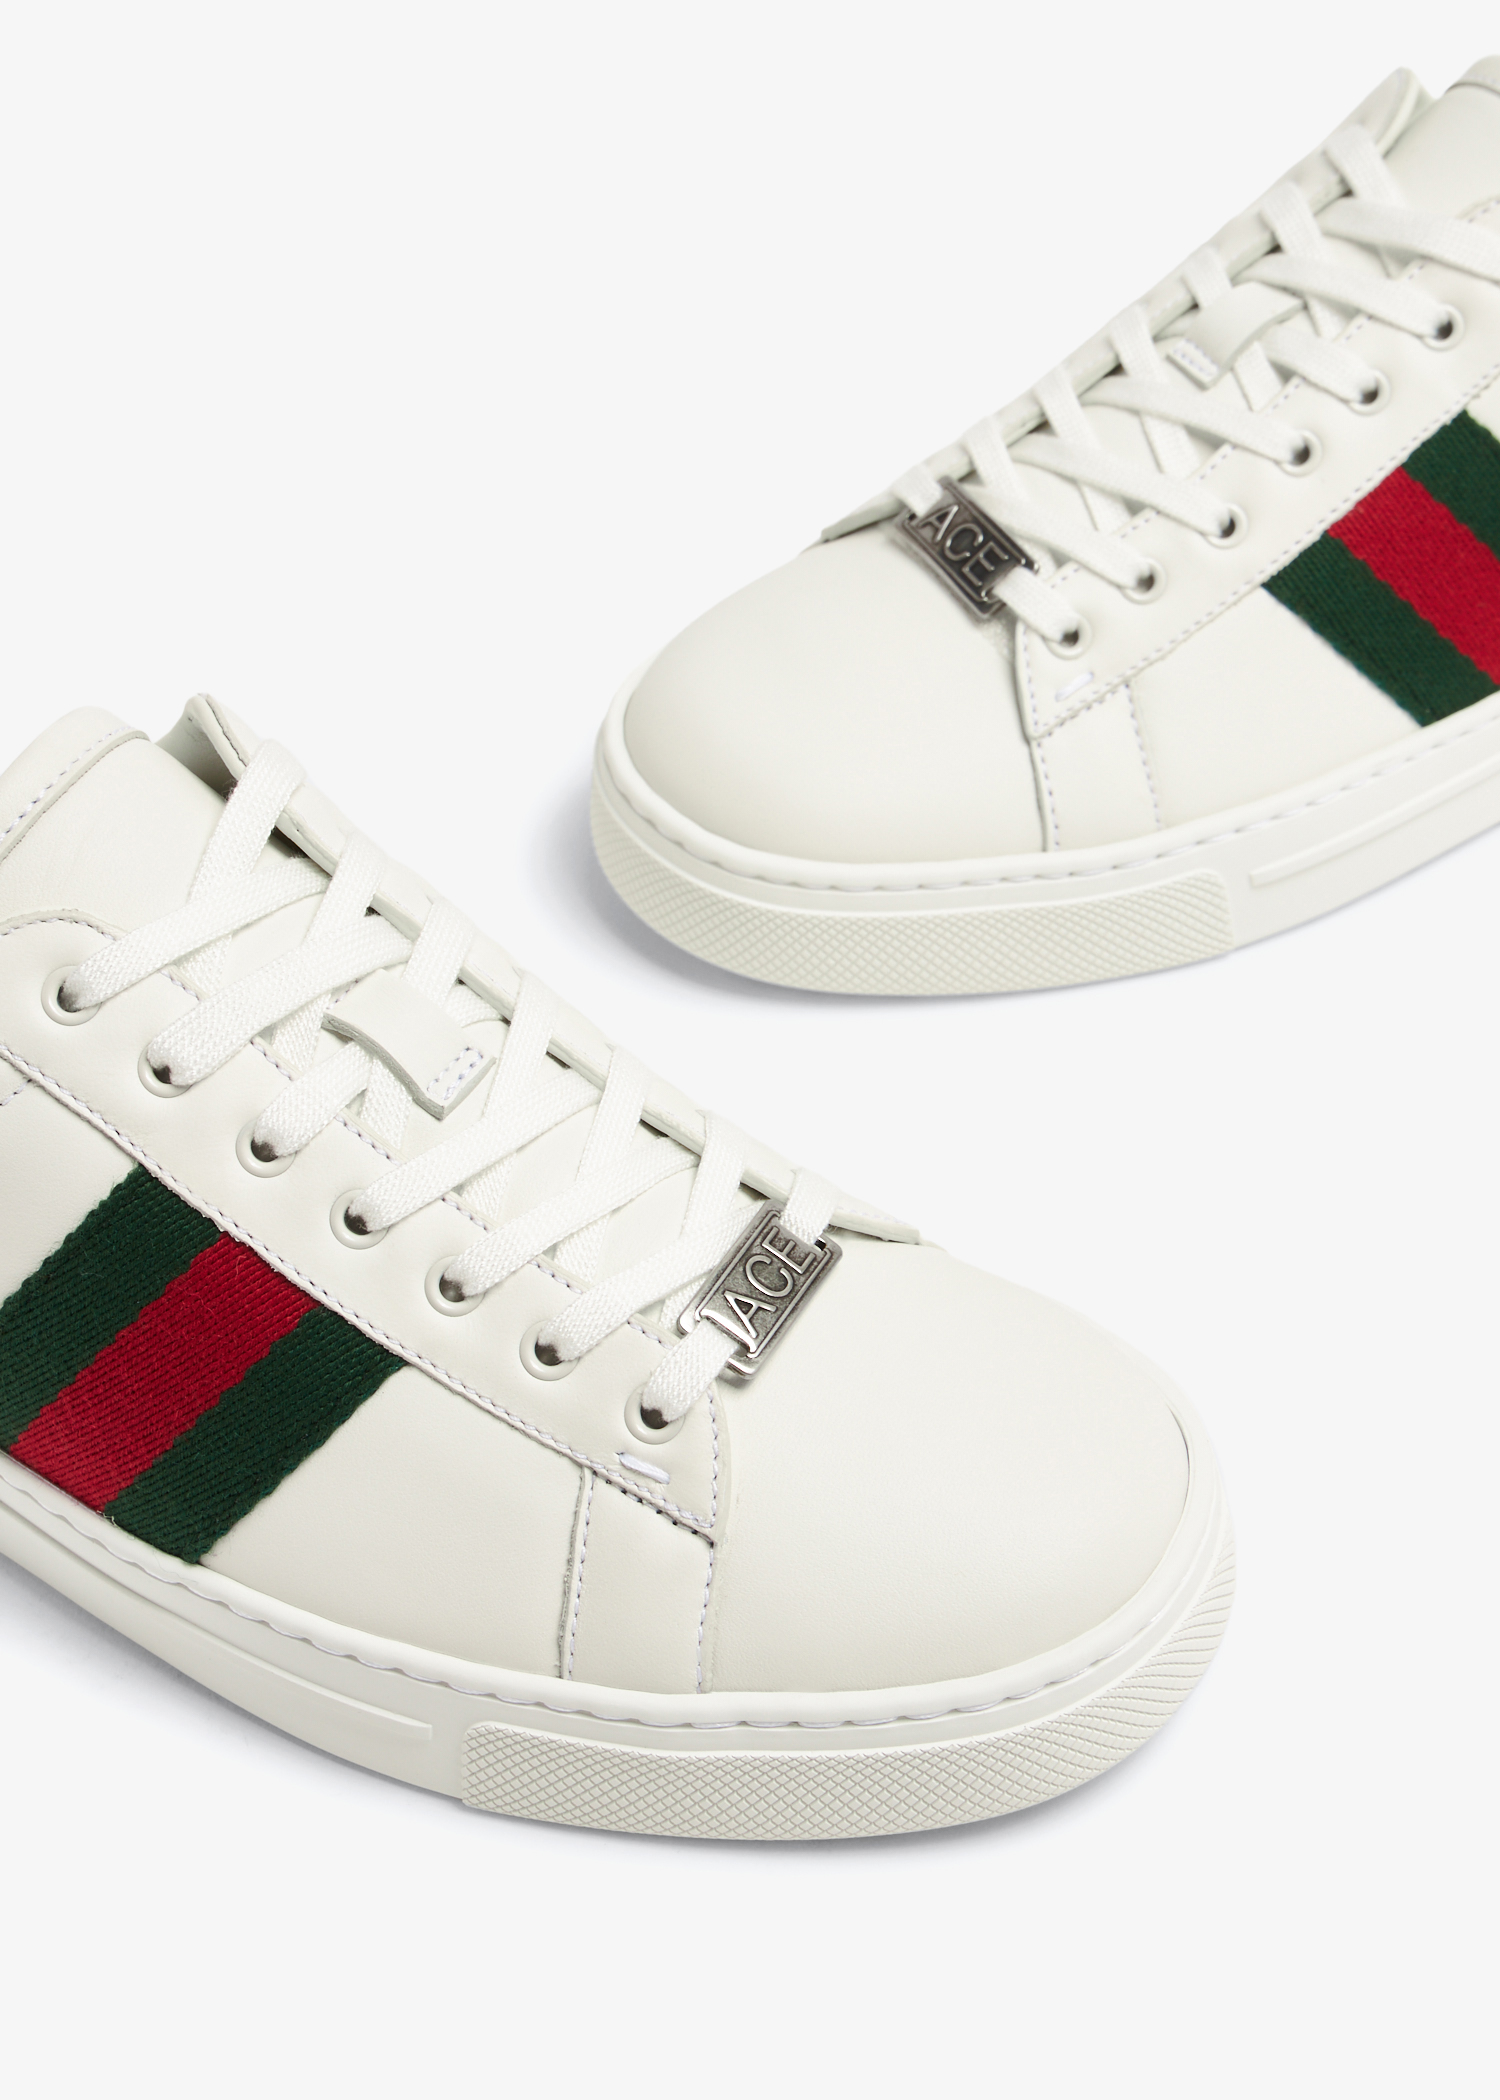 Gucci Men White Leather and Python Embossed Leather Ace Sneakers 5/39 –  STYLISHTOP